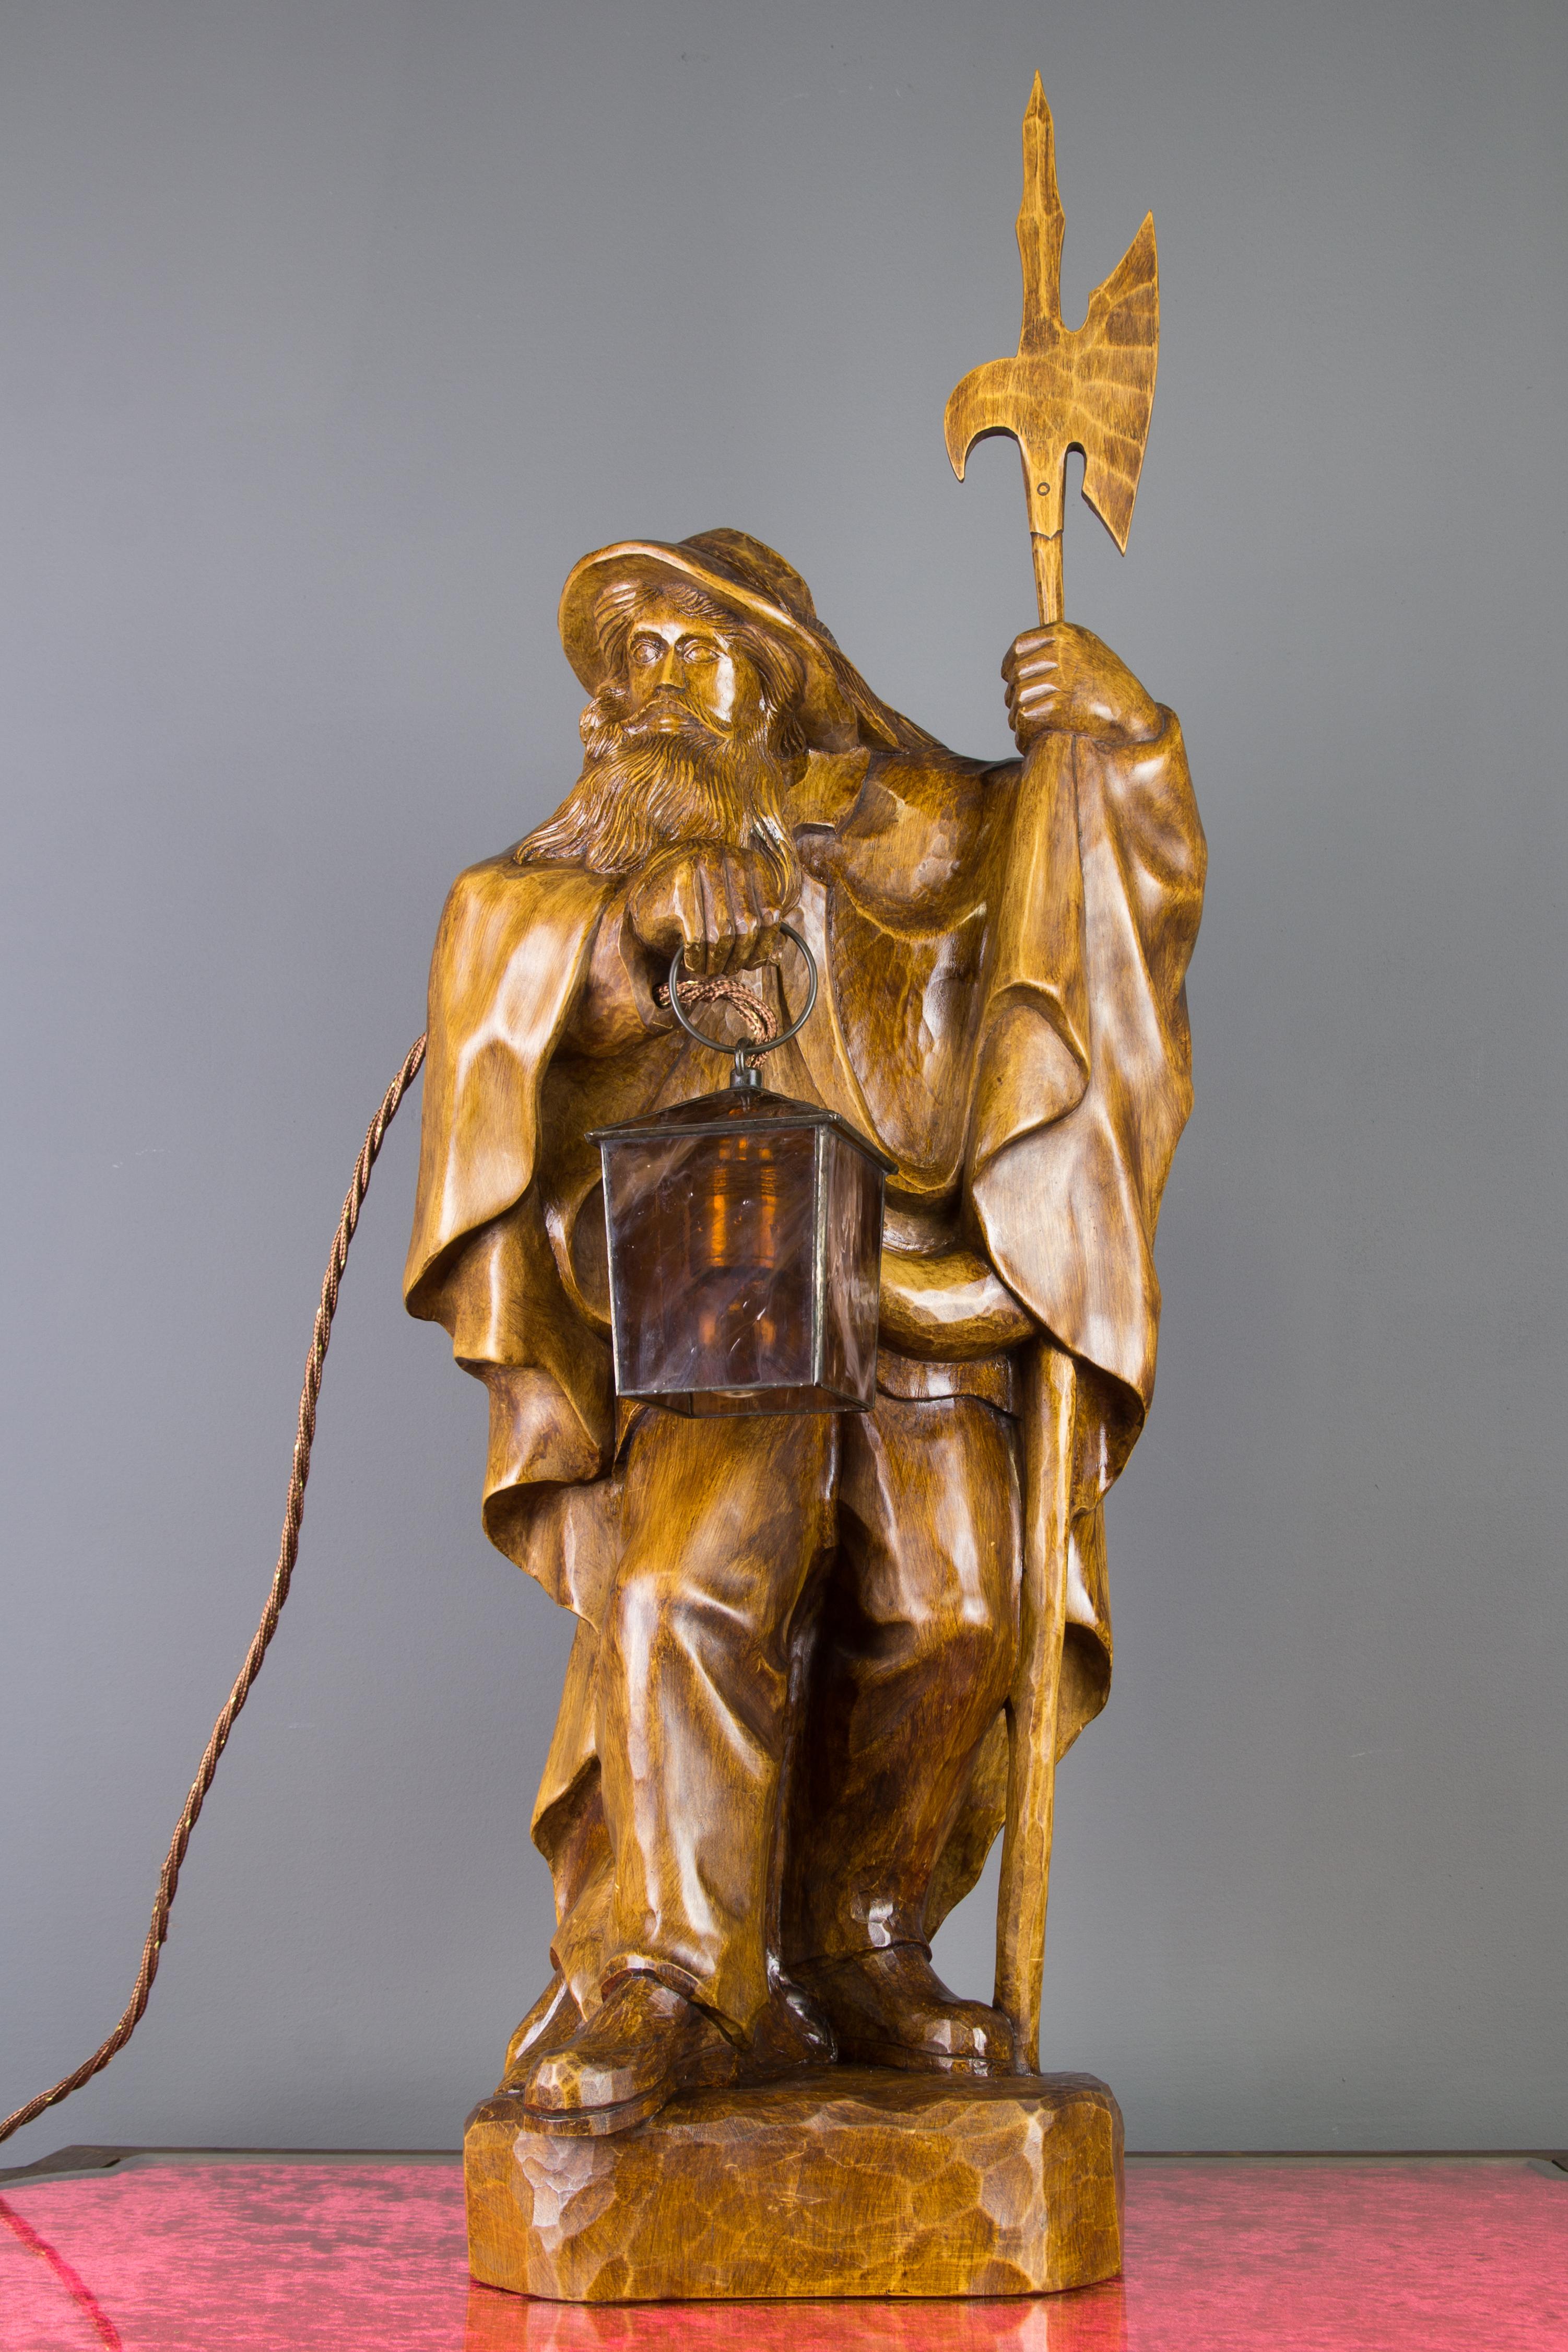 A masterfully hand-carved wooden lamp features a large sculpture of a night watchman with a lantern and halberd. Lantern is made of glass and iron. This beautiful sculpture lamp can be used as a floor or a table lamp. Signed WB. Germany, mid-20th